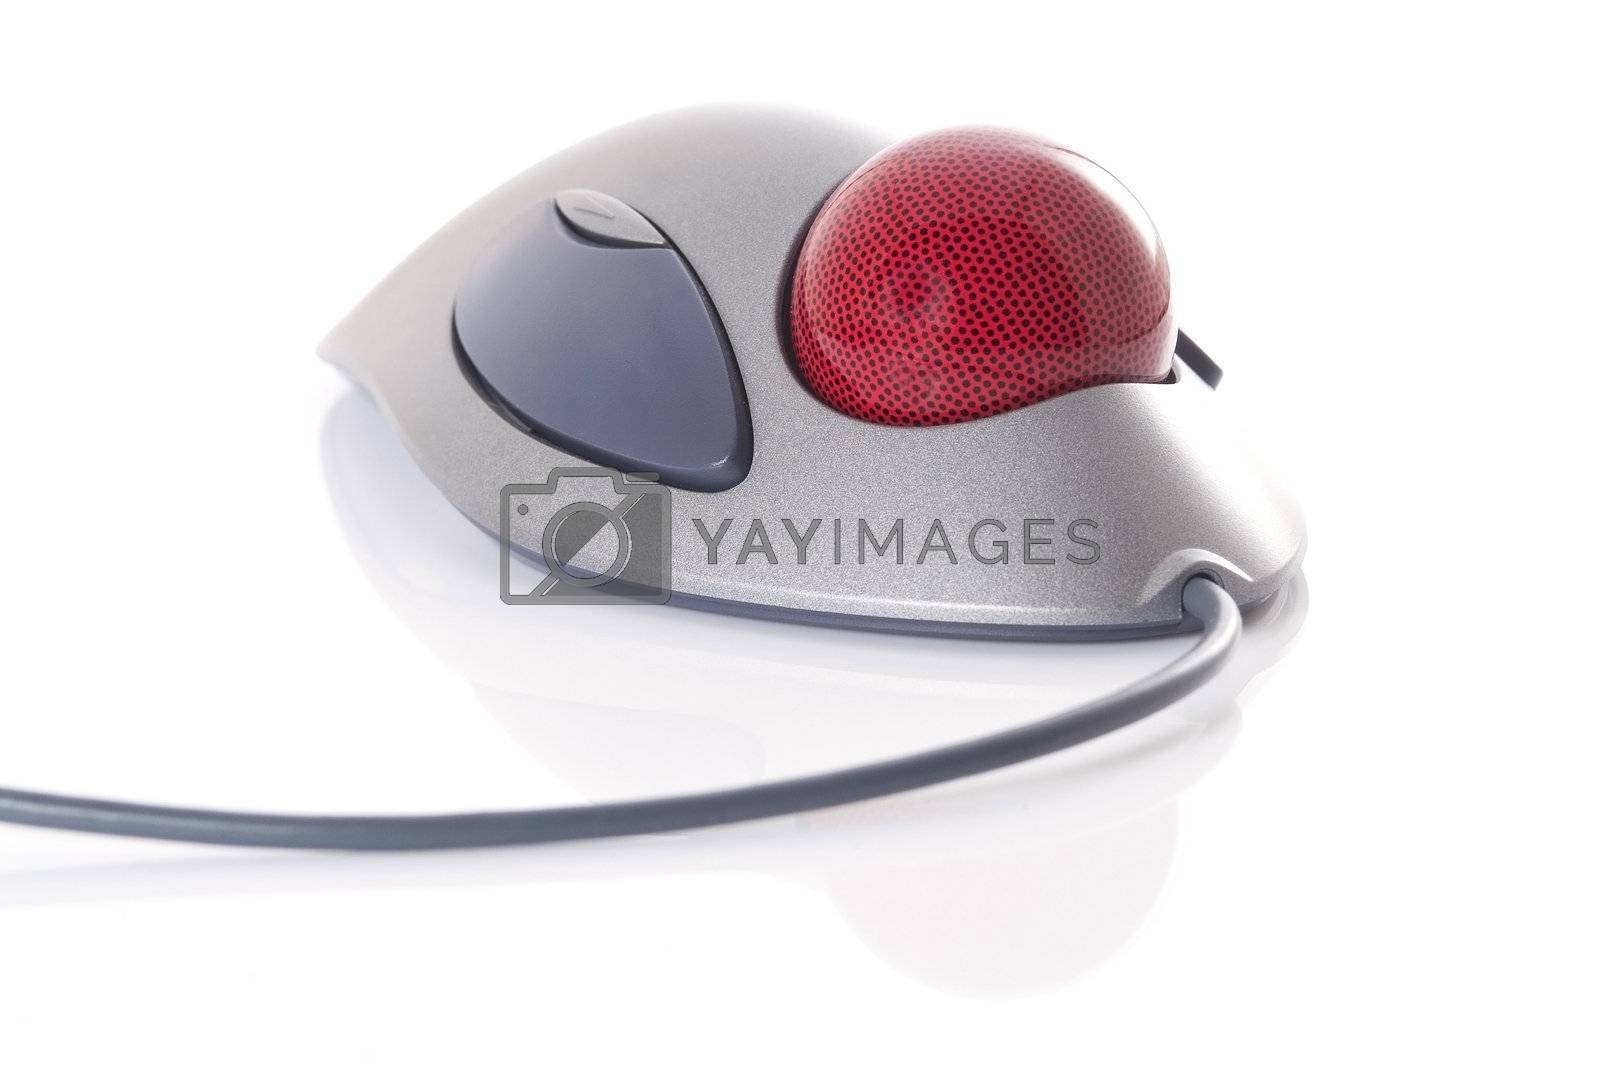 Royalty free image of Trackball on white background by epixx